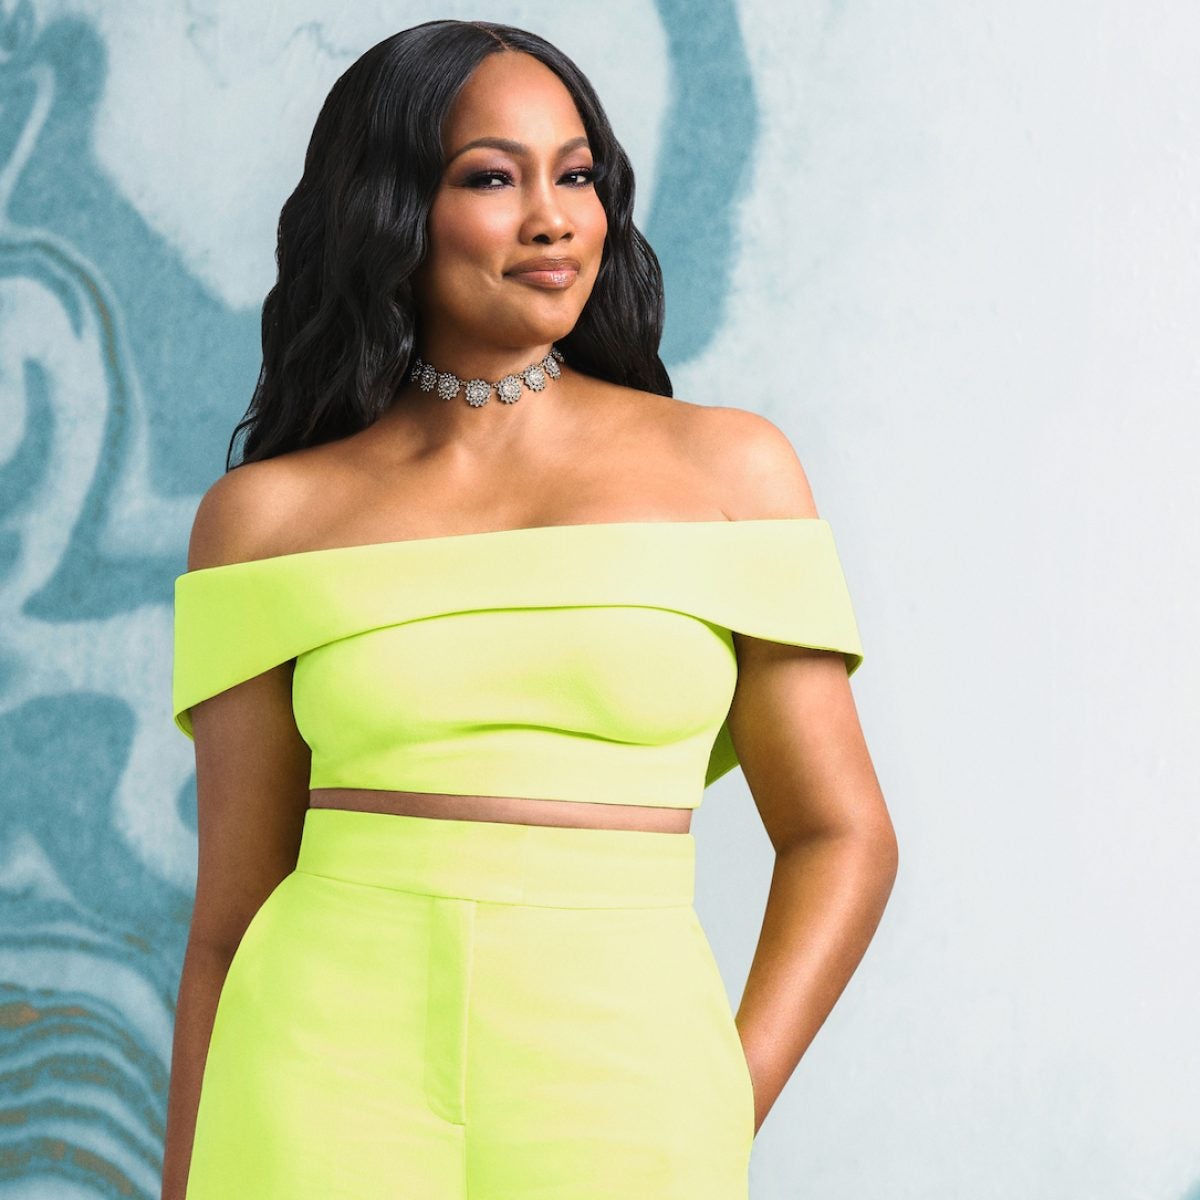 Every Photo Of Garcelle Beauvais (So Far!) From 'Real Housewives of Beverly Hills'